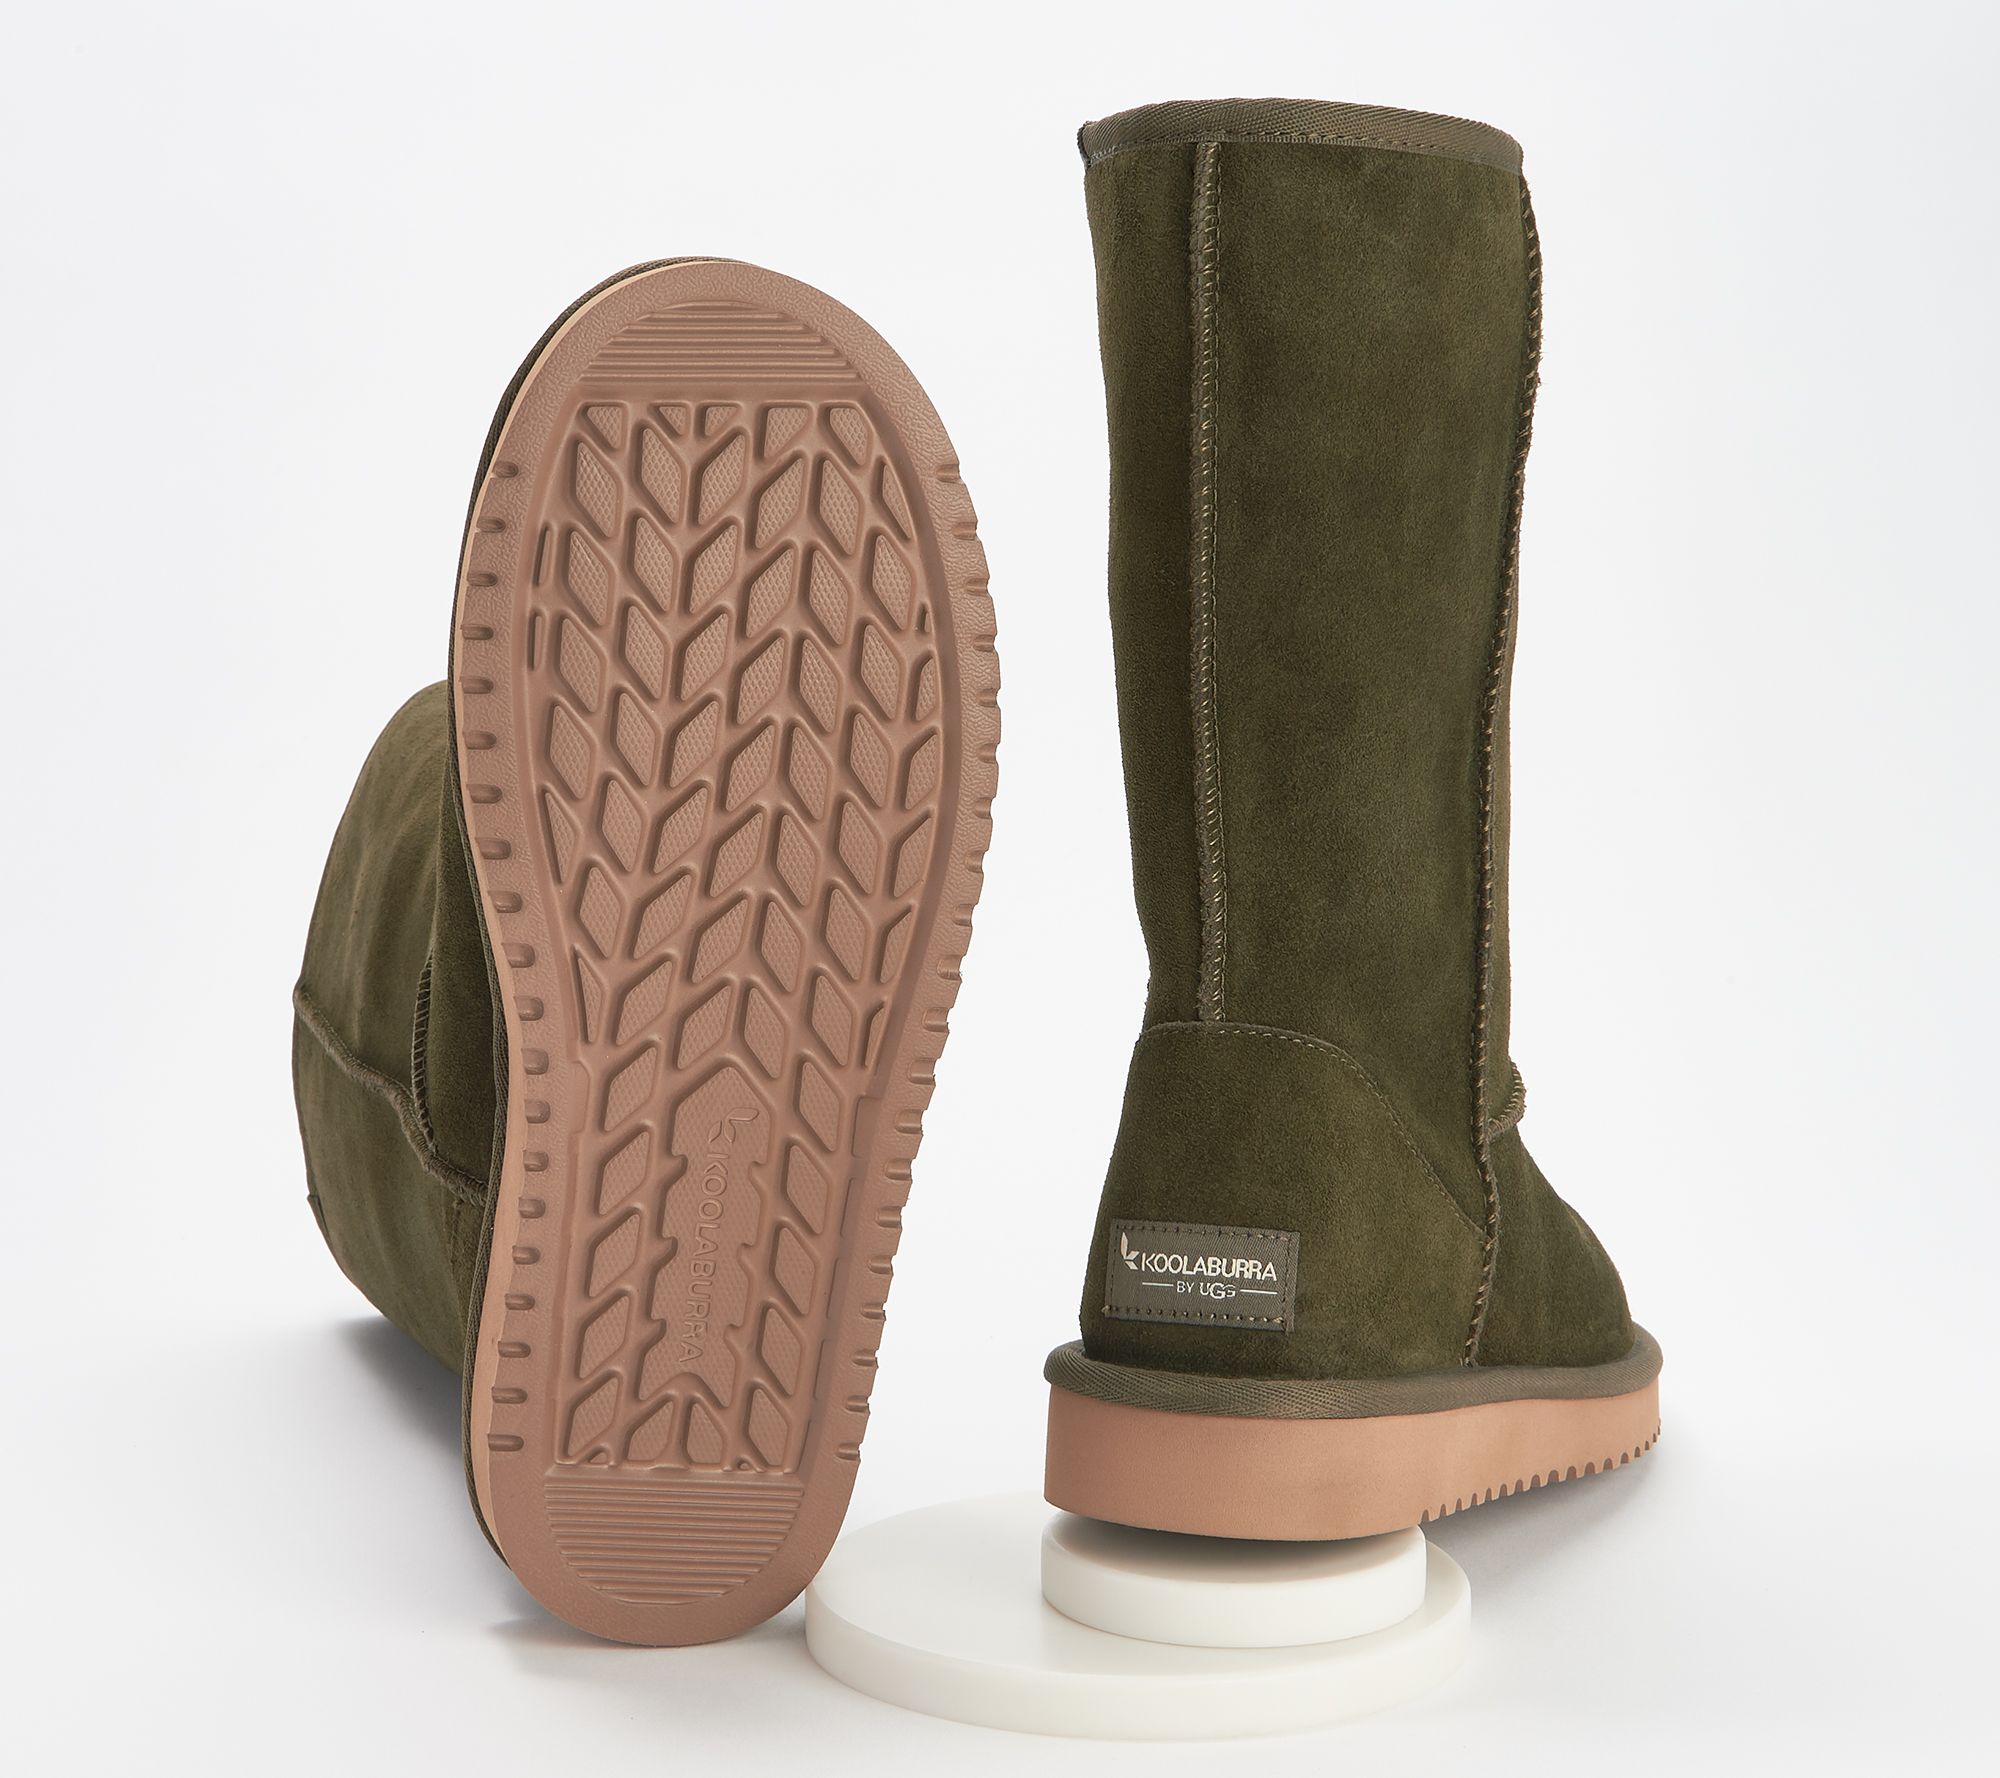 Ugg Slippers and Boots Are Secretly on Sale Starting at $60